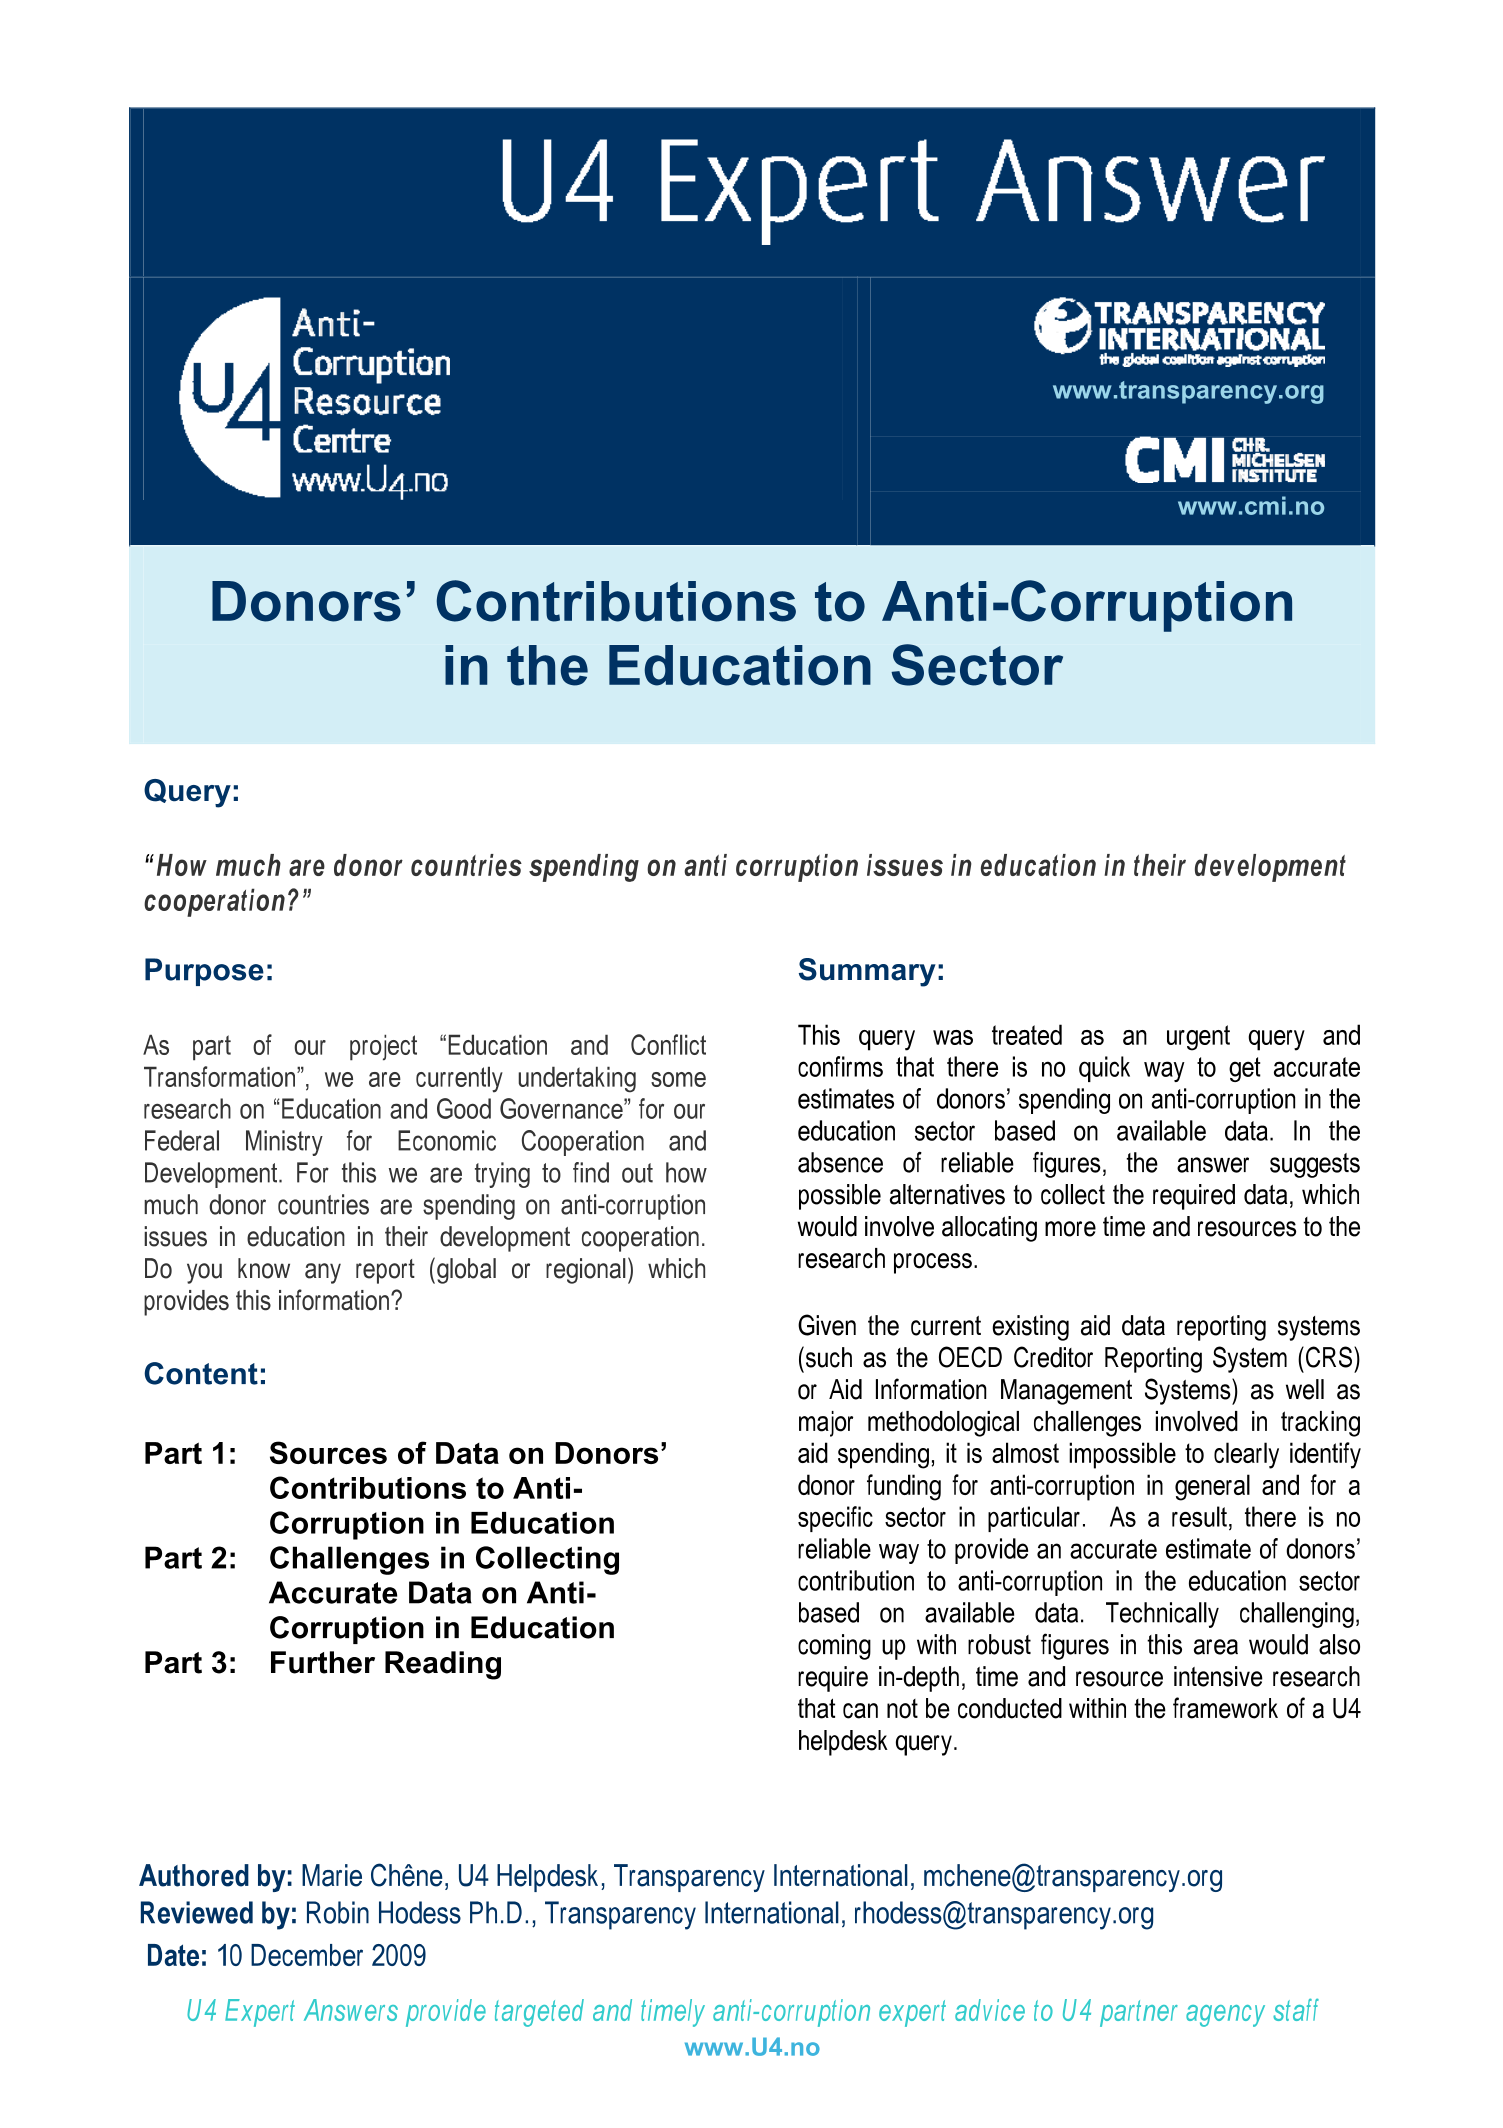 Donors’ Contributions to Anti-Corruption in the Education Sector